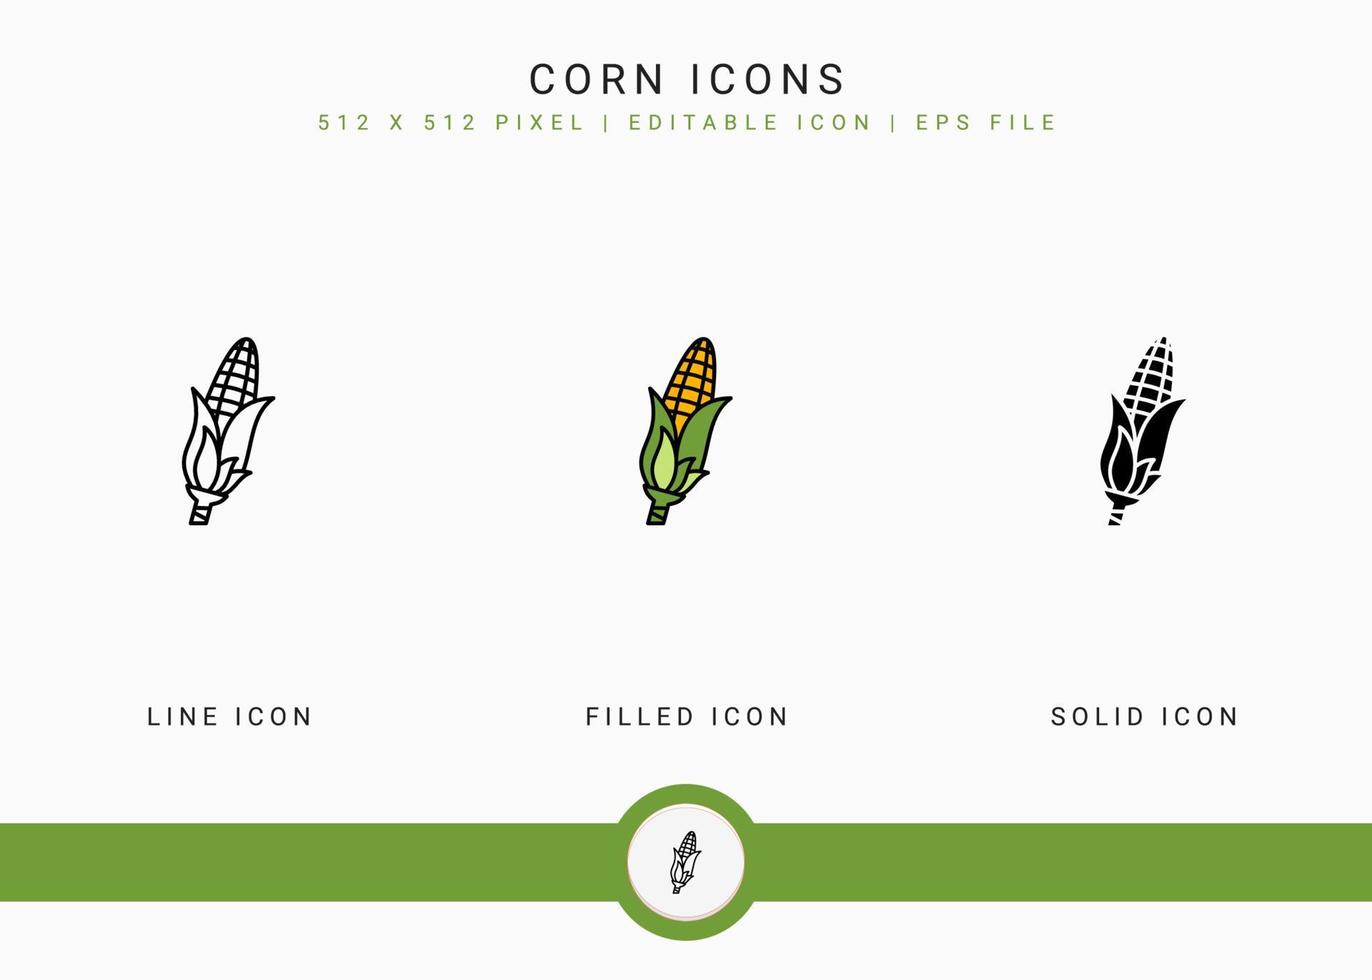 Corn icons set vector illustration with solid icon line style. Vegetable healthy concept. Editable stroke icon on isolated background for web design, user interface, and mobile application